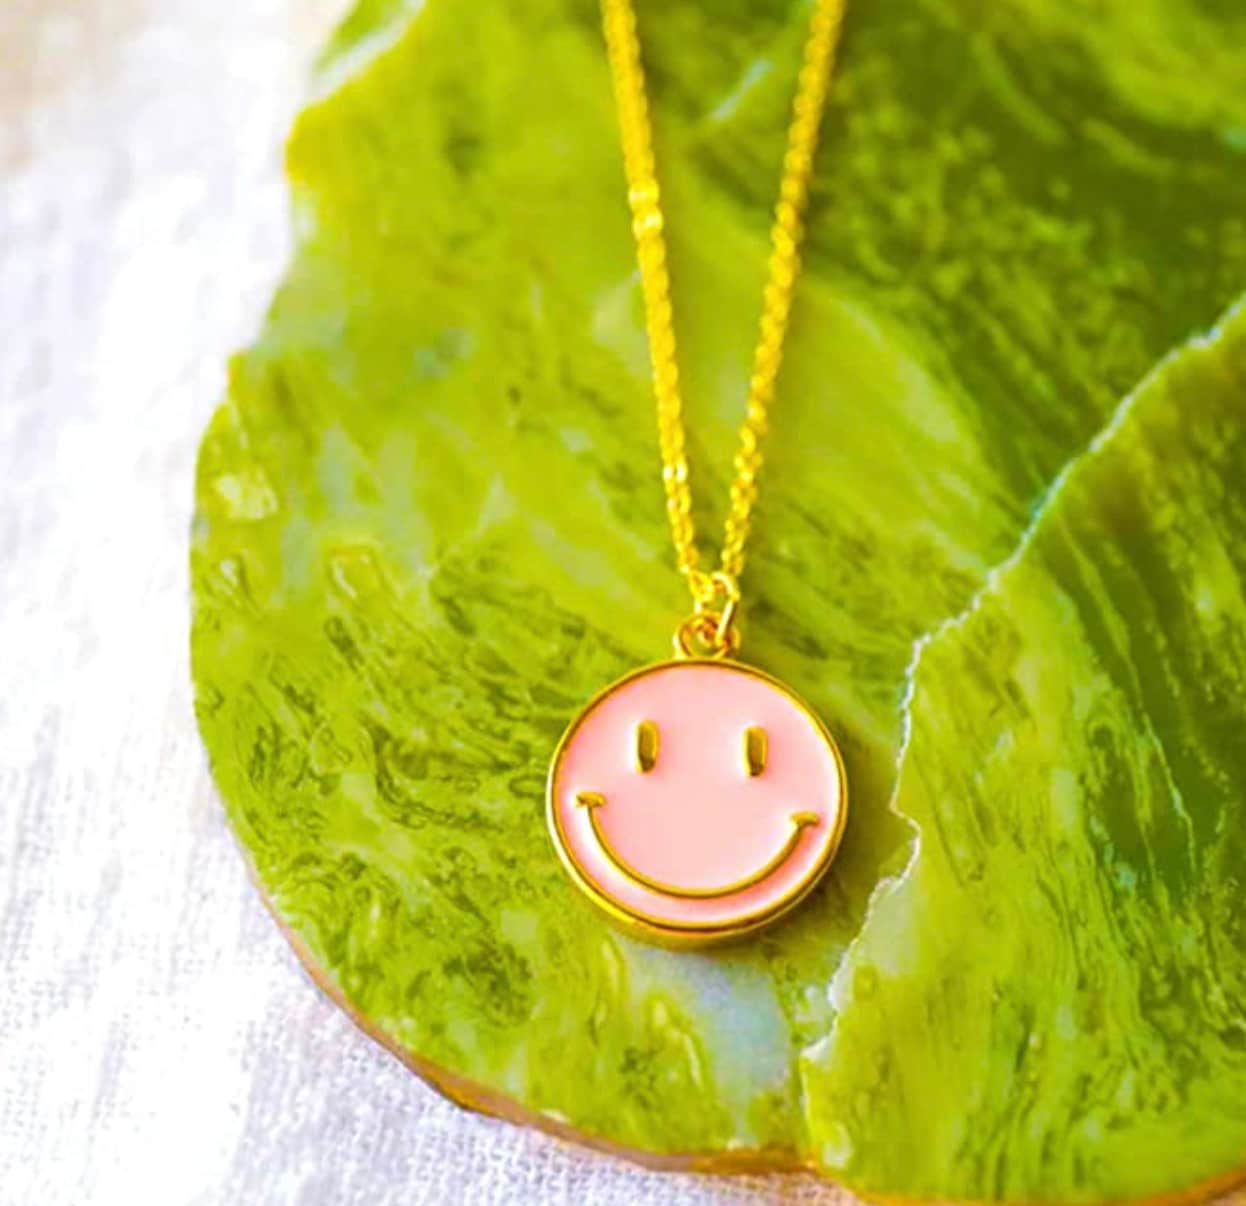 The Smiley Necklace